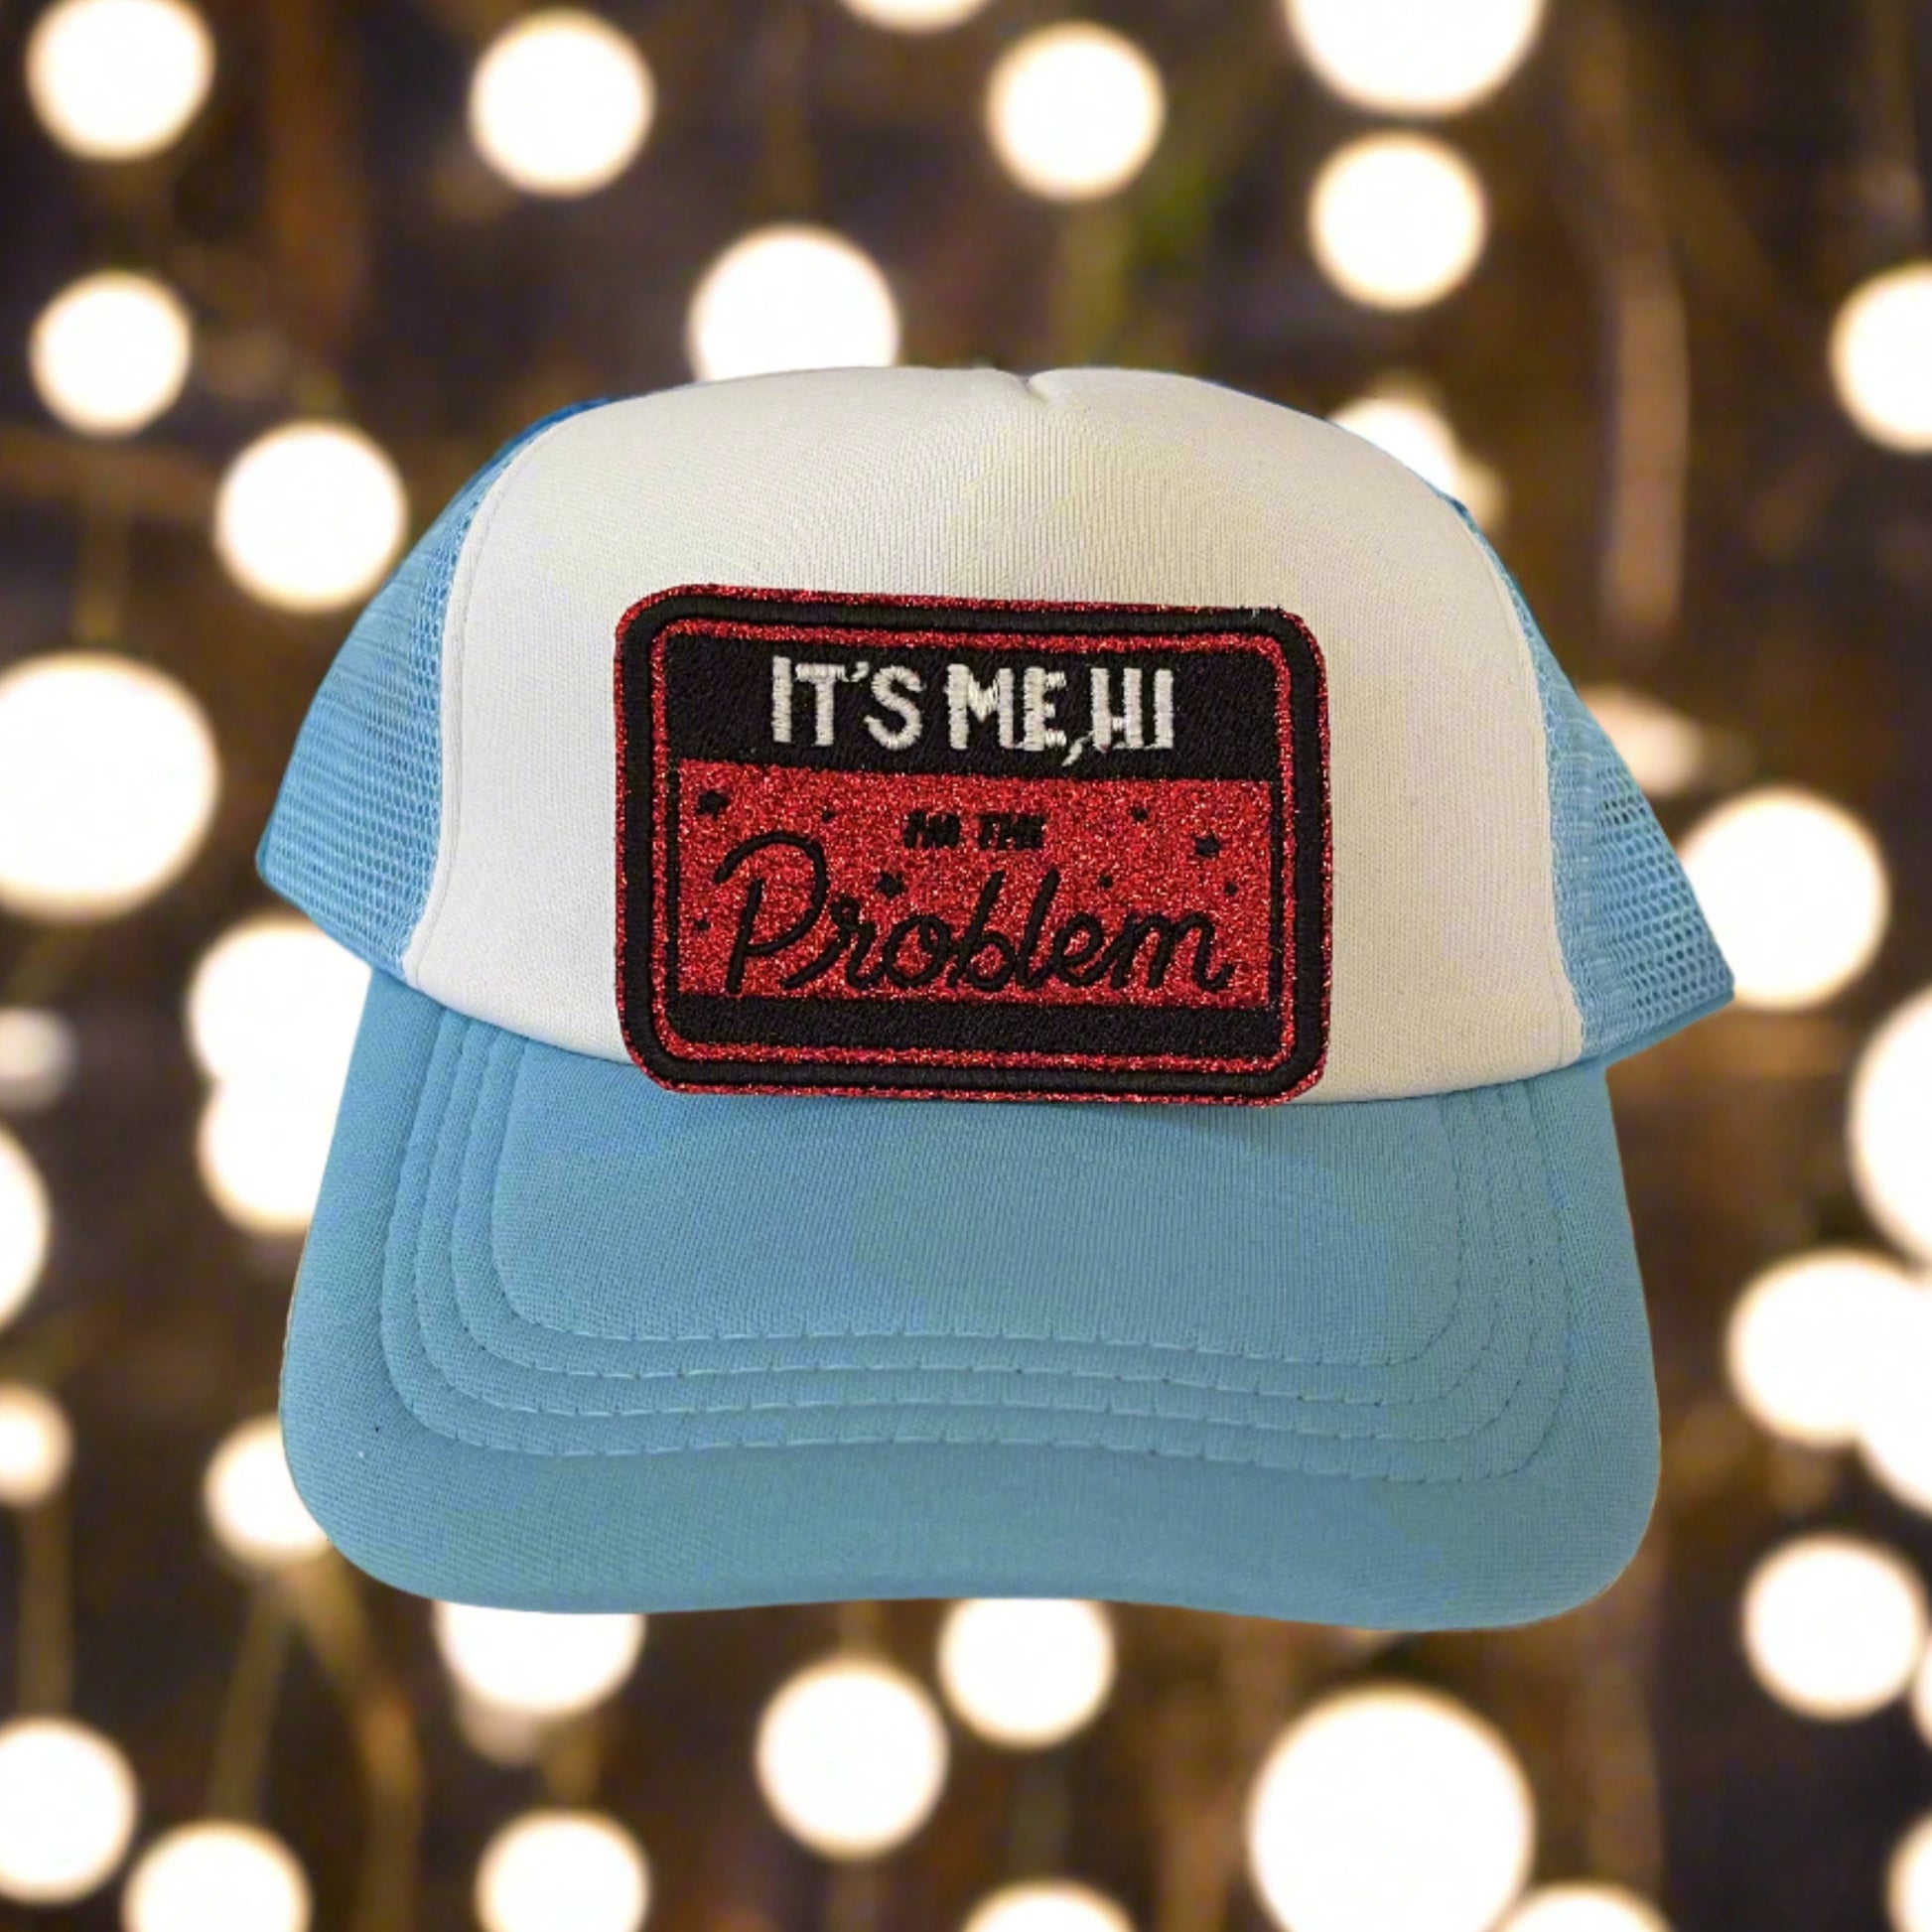 Iron-on patch featuring the text "It's Me, Hi, I'm the Problem" from Taylor Swift's song "Anti-Hero" in a bold and playful design, showcasing a stylish and humorous aesthetic.